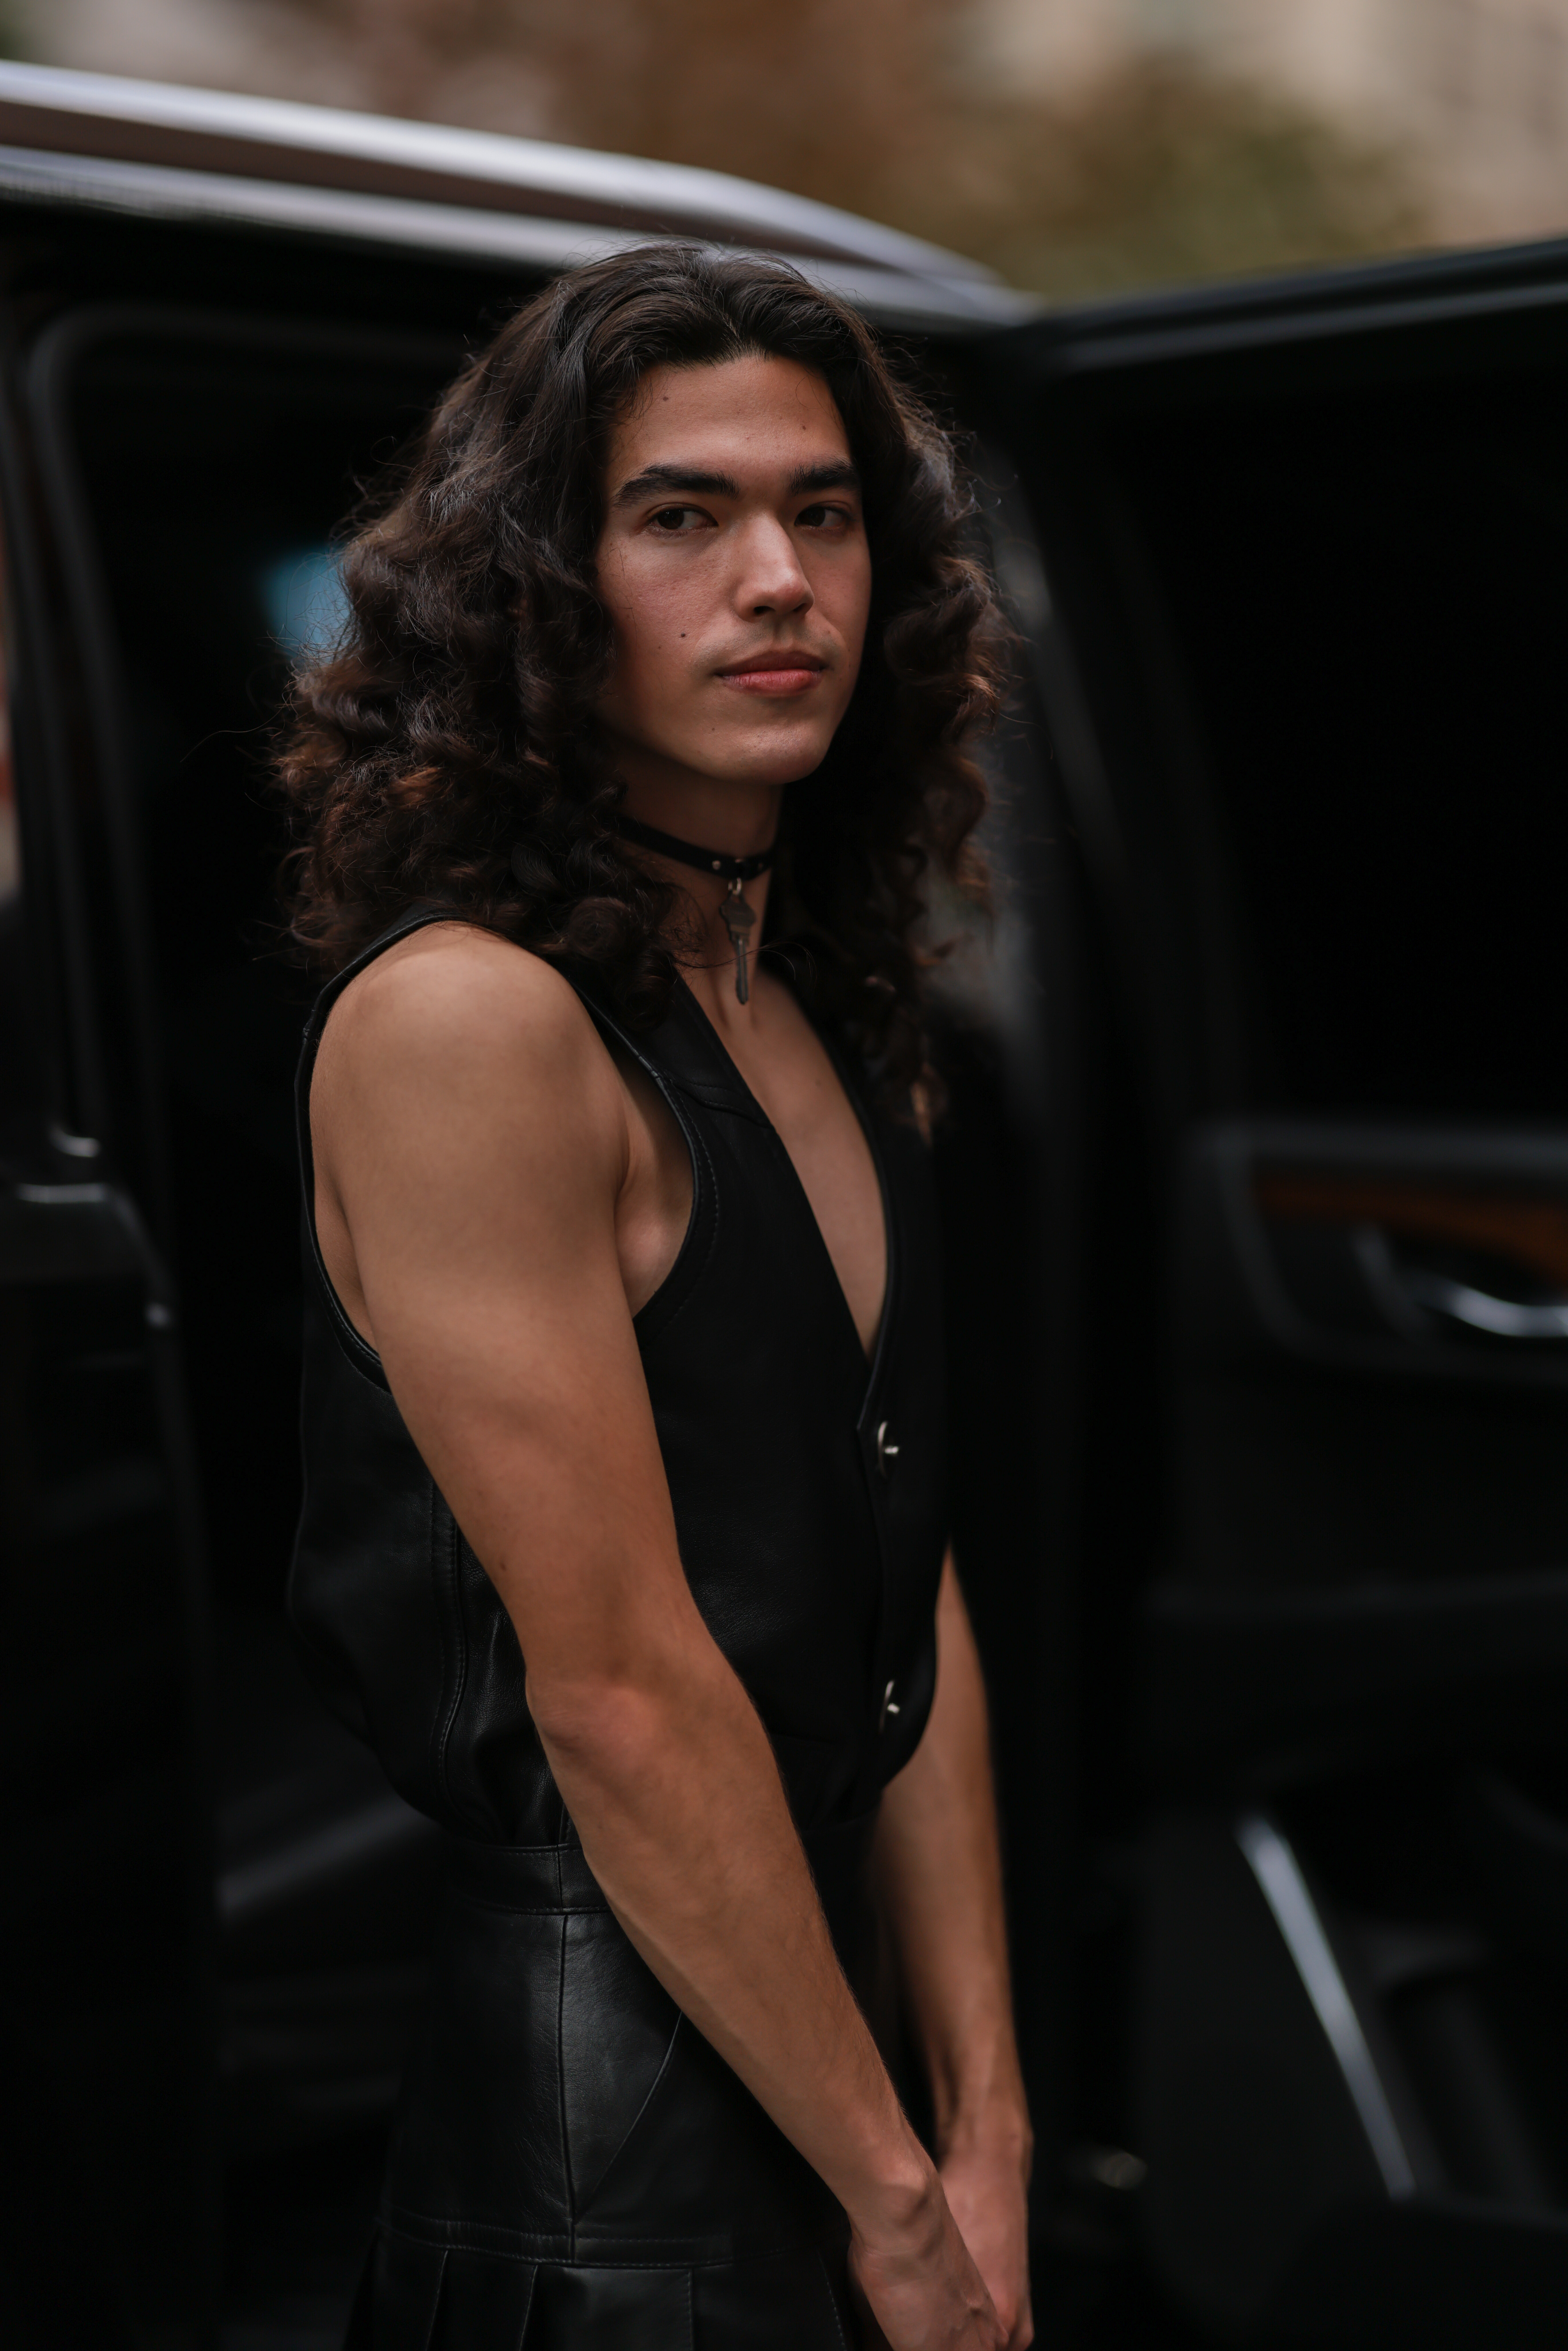 Conan Gray is seen wearing a full leather outfit outside a coach during New York Fashion Week on September 12, 2022, in New York City | Source: Getty Images